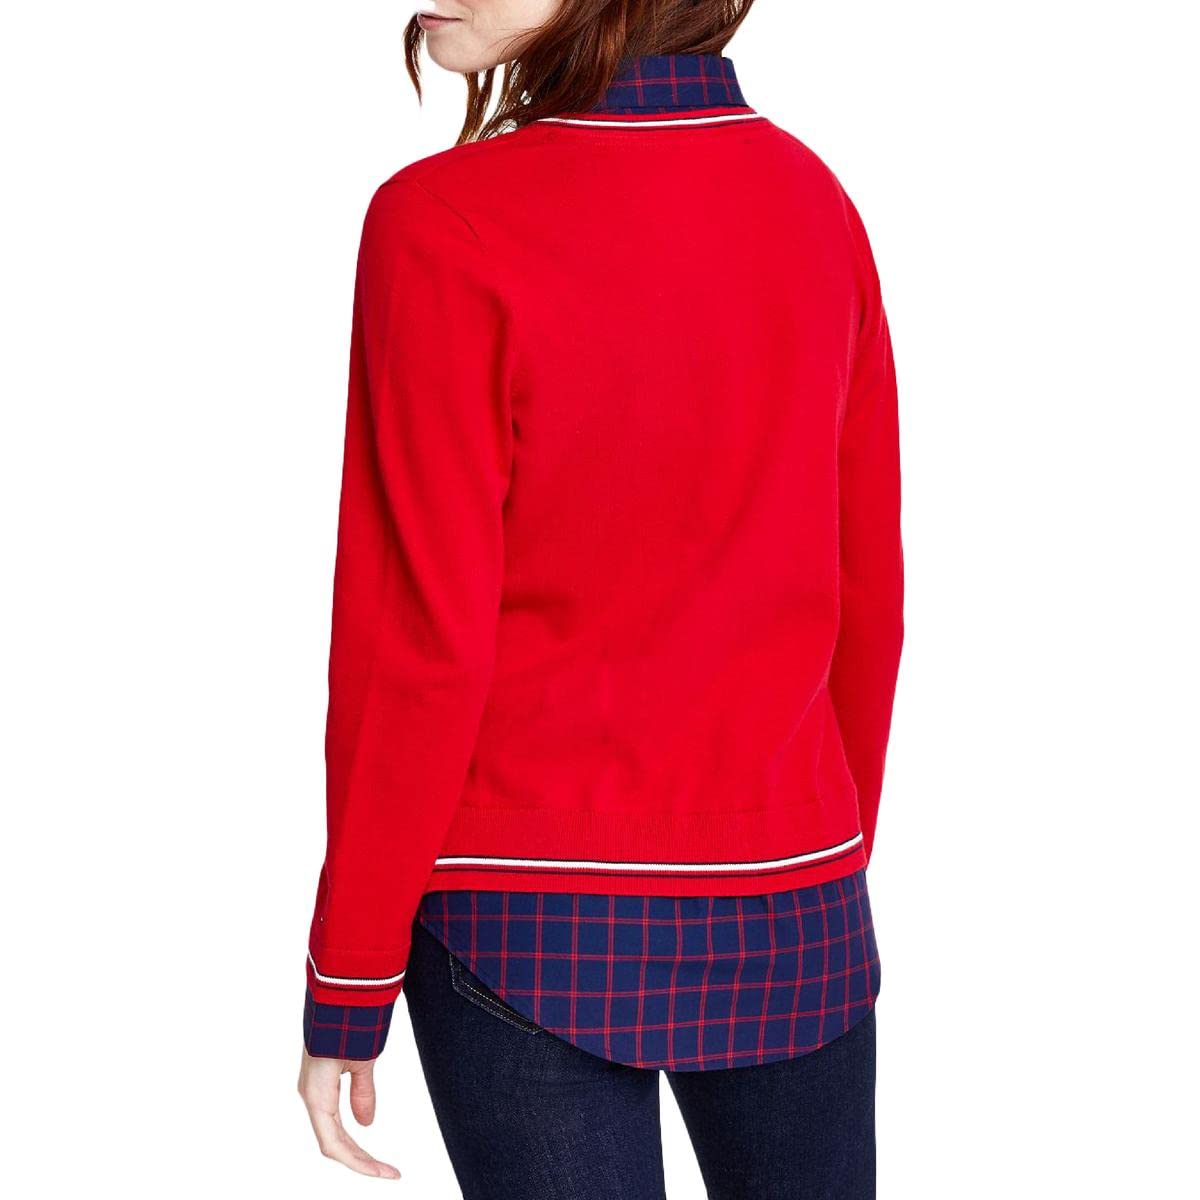 Tommy Hilfiger Womens Layered Striped Edge Pullover Sweater Red L